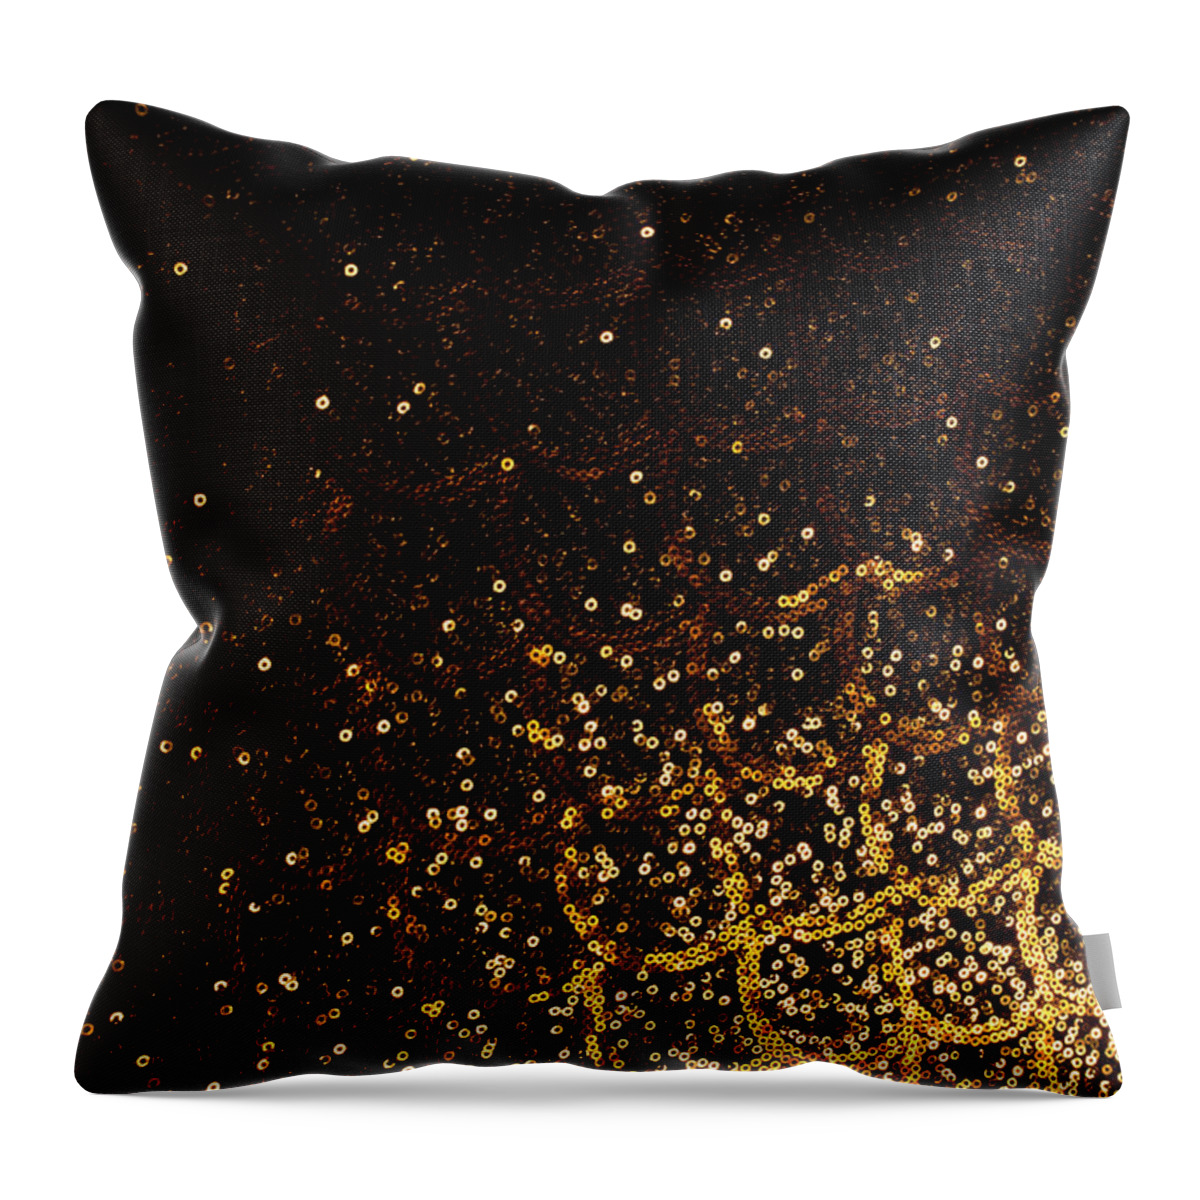 Black Background Throw Pillow featuring the photograph Golden Metal Rings by Gm Stock Films